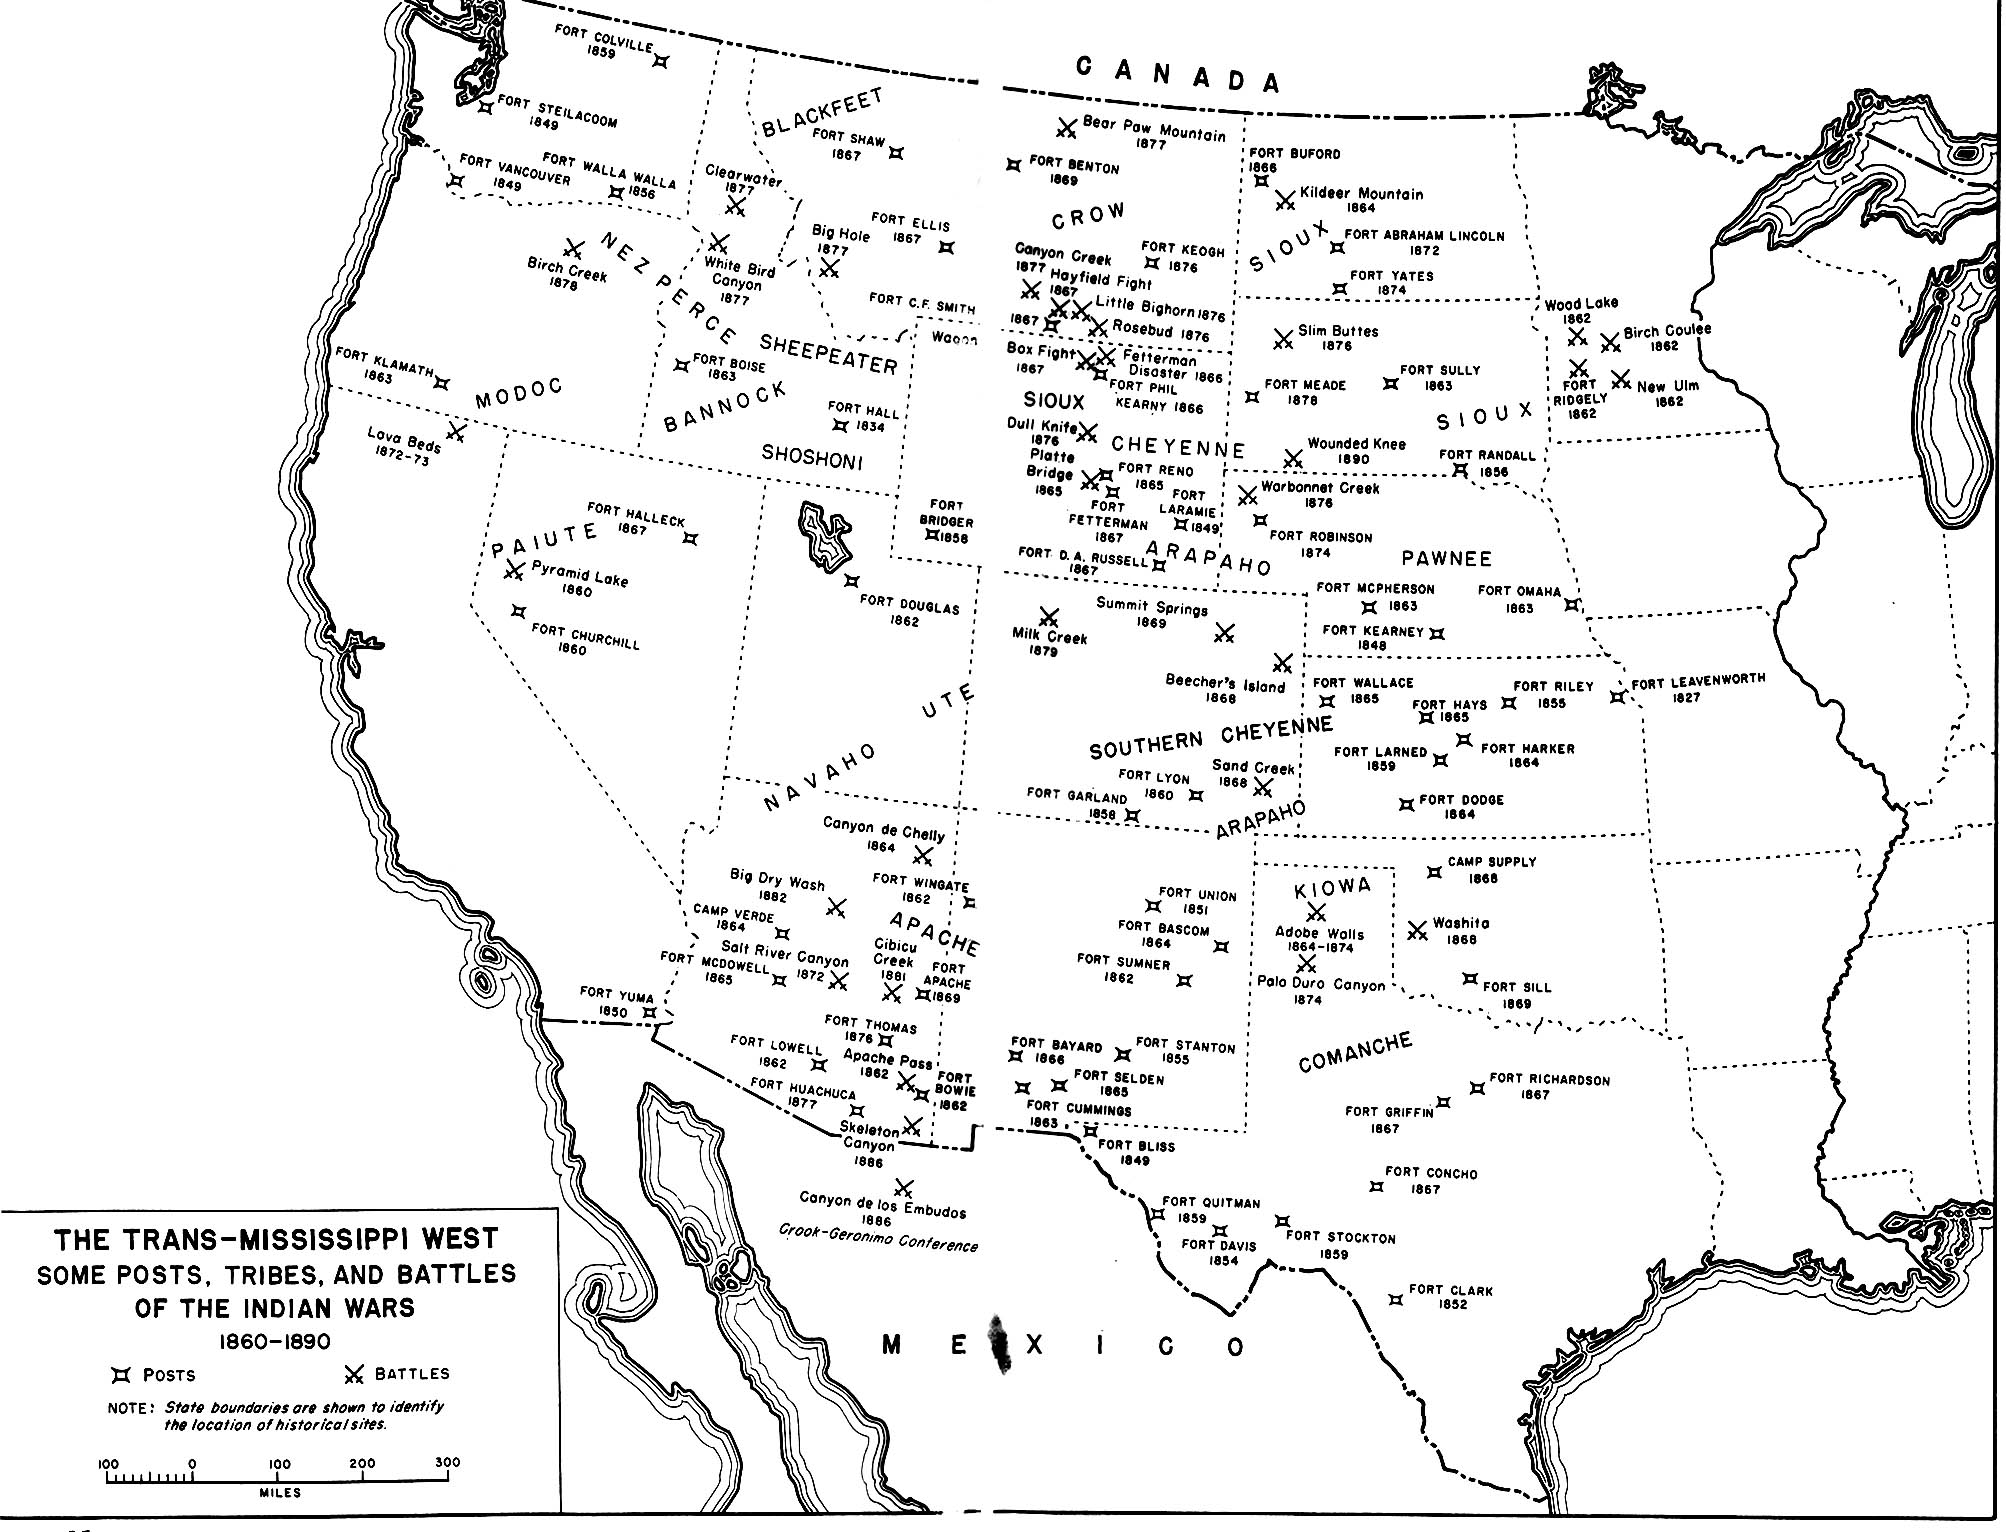 Historical Maps of United States. 1860-1890 - The Trans-Mississippi West Some Posts, Tribes, and Battles of the Indian Wars (452K) 